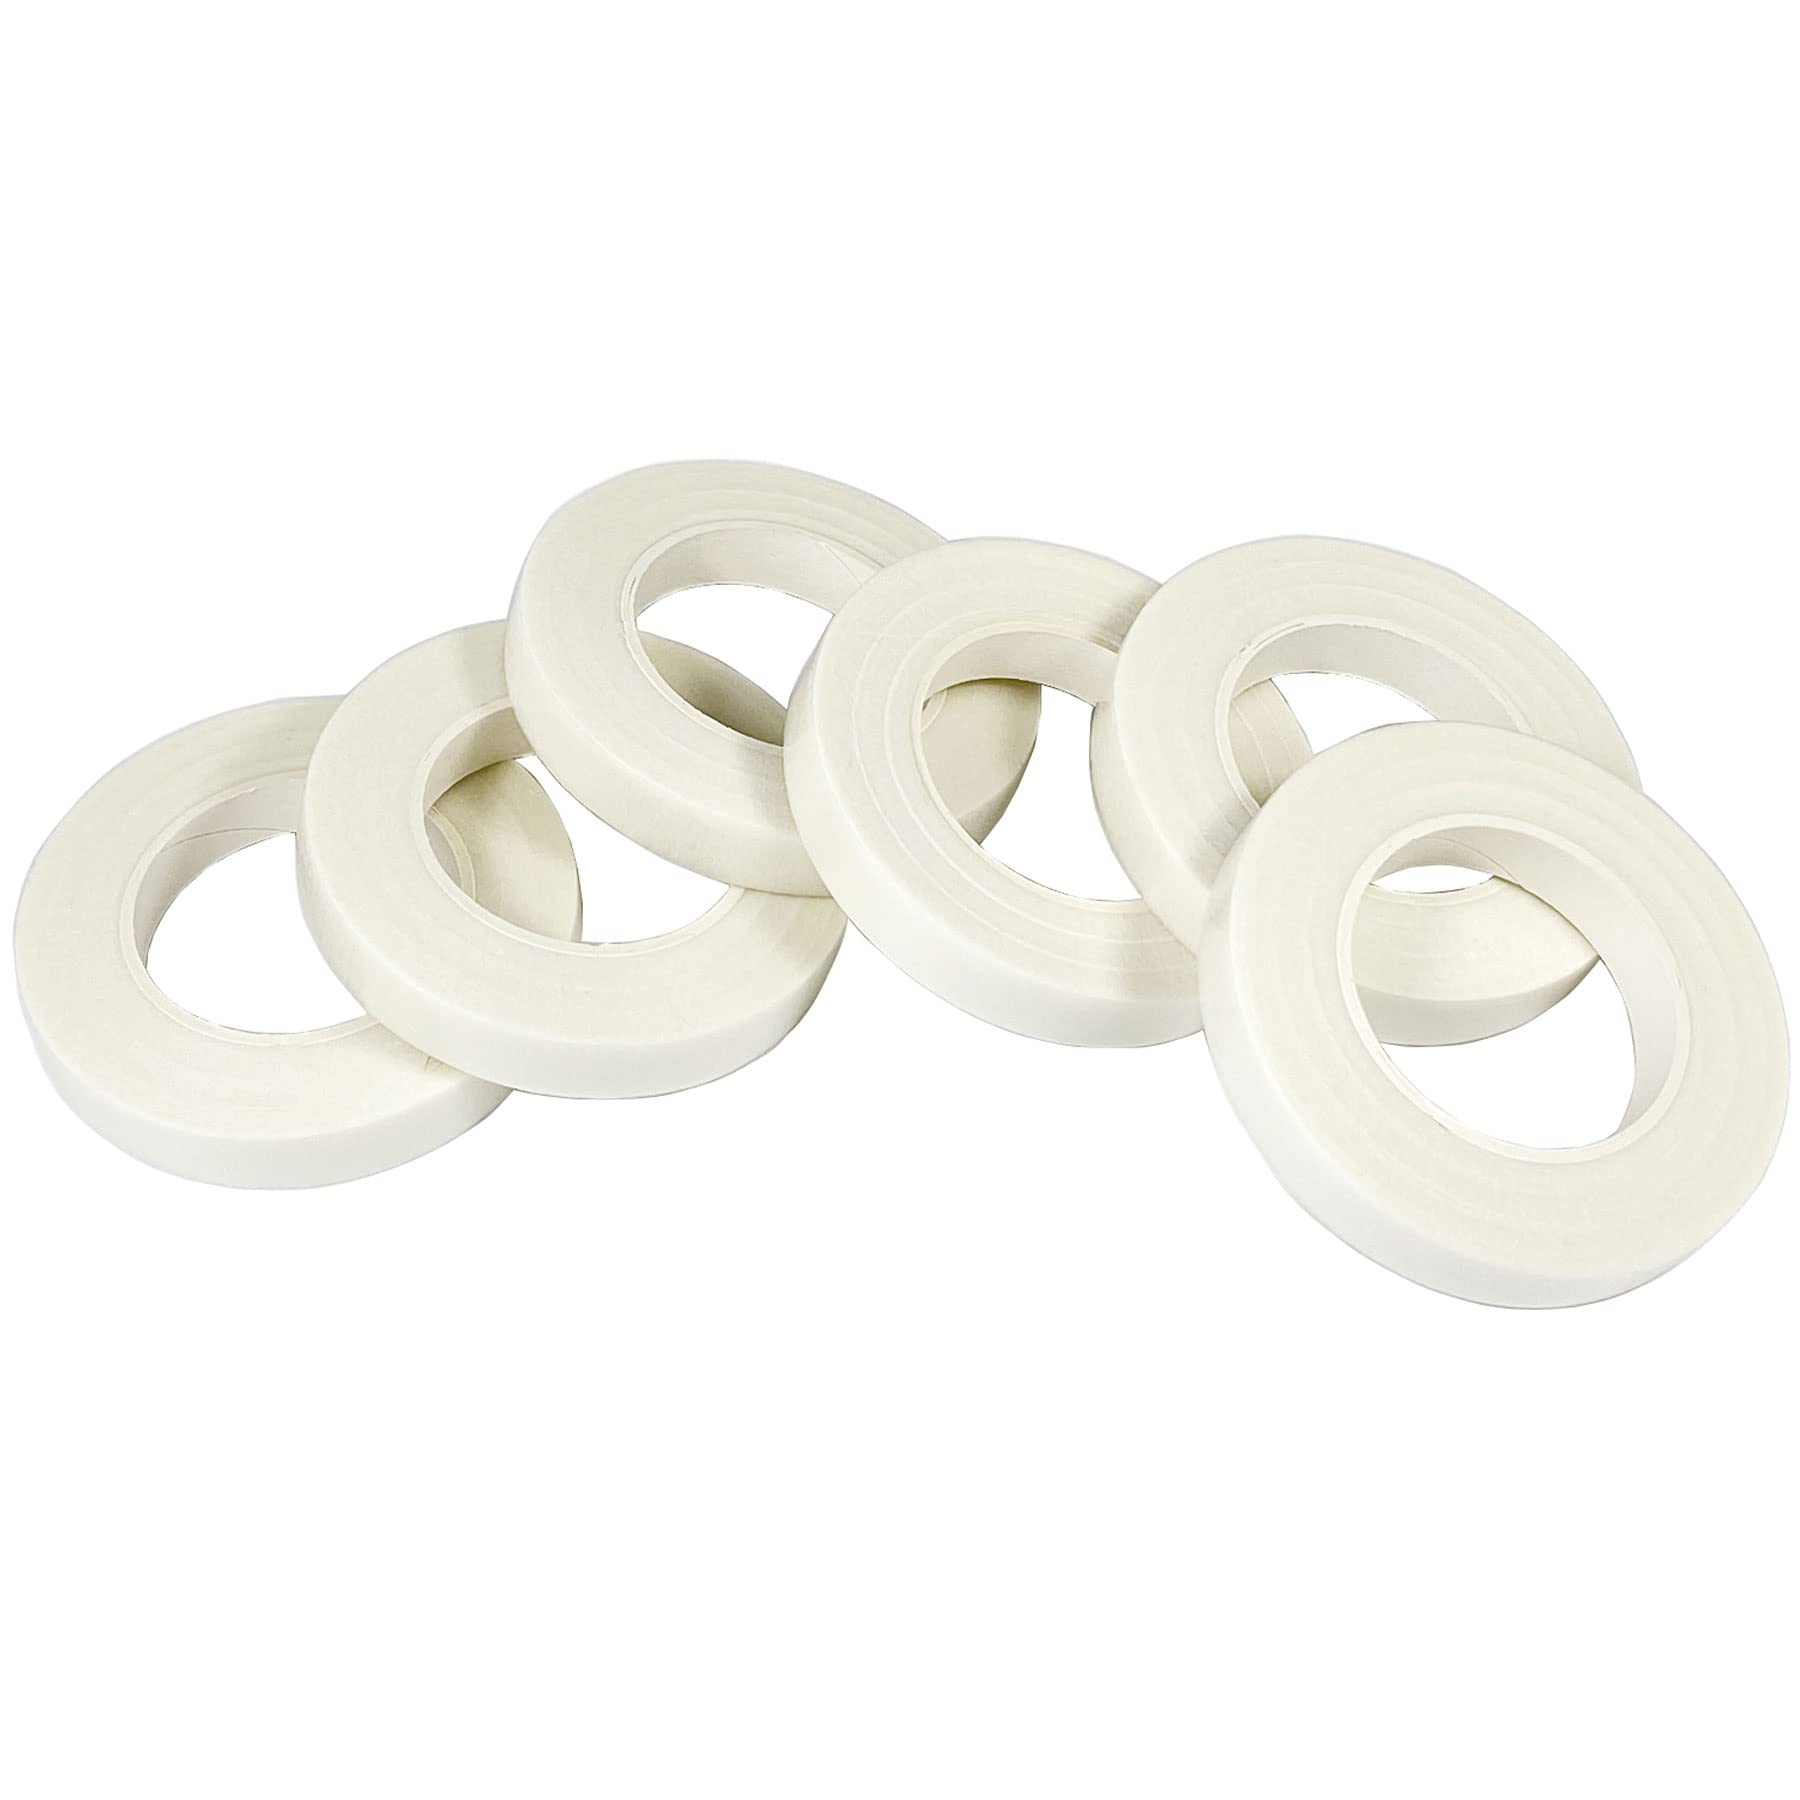 zYoung 6 Rolls White Floral Tapes for Bouquet Stem Wrapping and